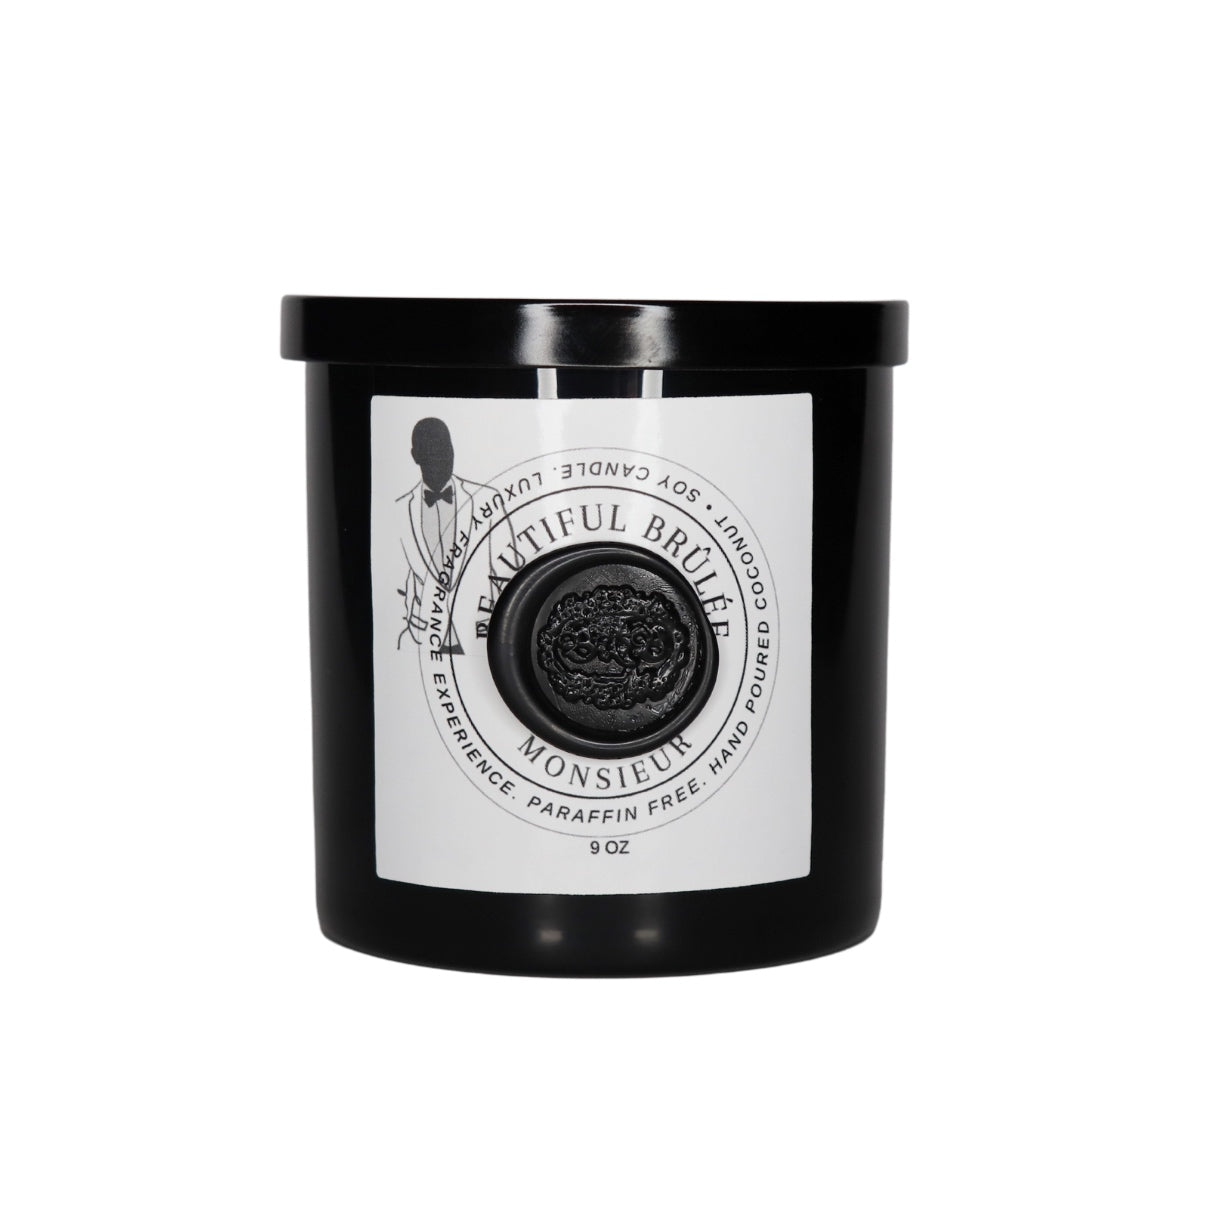 "MONSIEUR" LUXURY SCENTED CANDLE